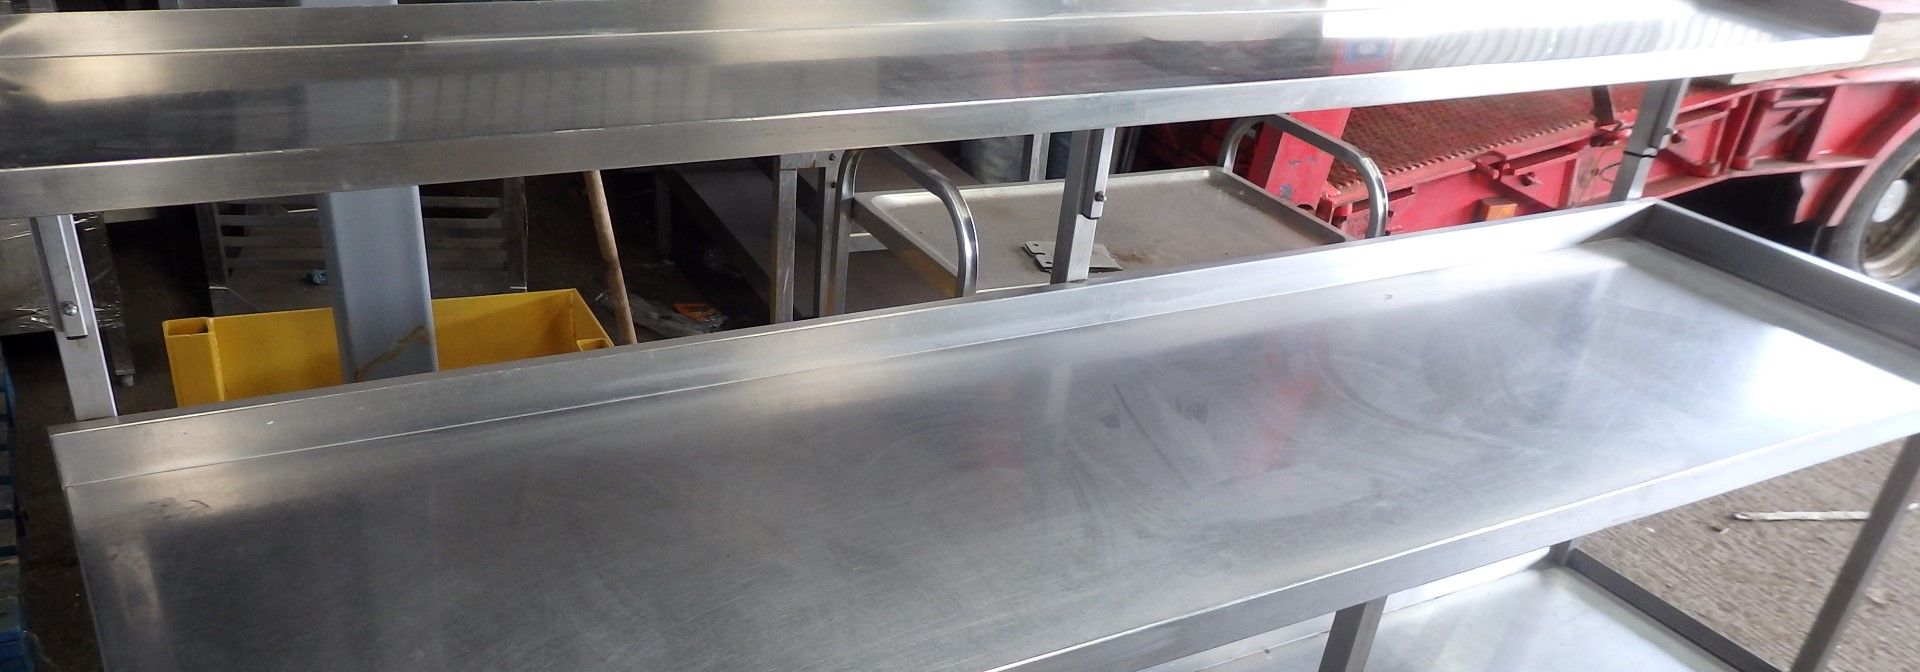 1 x Stainless Steel Commercial Kitchen Prep Bench With Undershelf and Overshelf - CL057 - H86/130 - Image 3 of 4